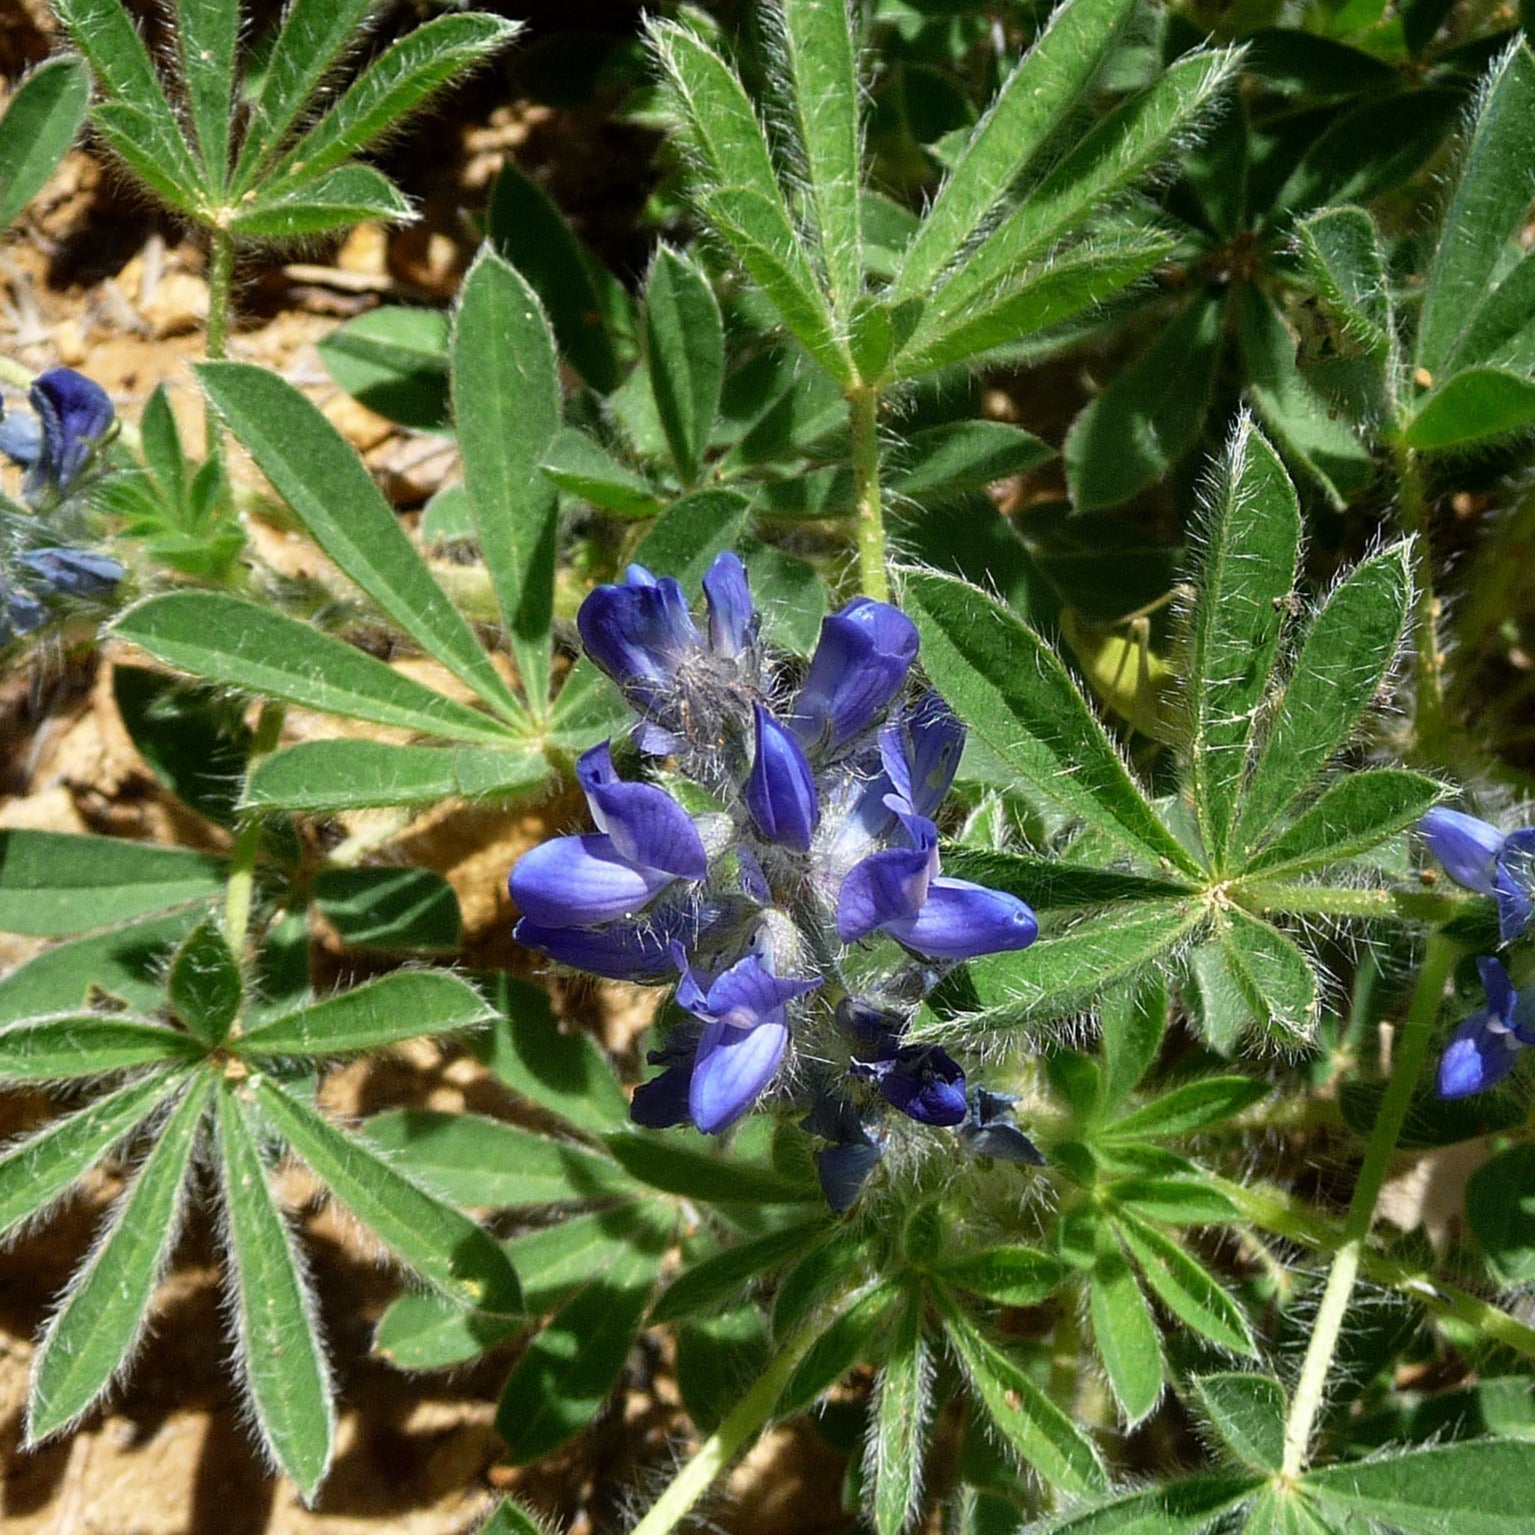 Small blue-purple flowers growing from a green plant. The leaves of the plant are covered in small hairs and are fan-like.